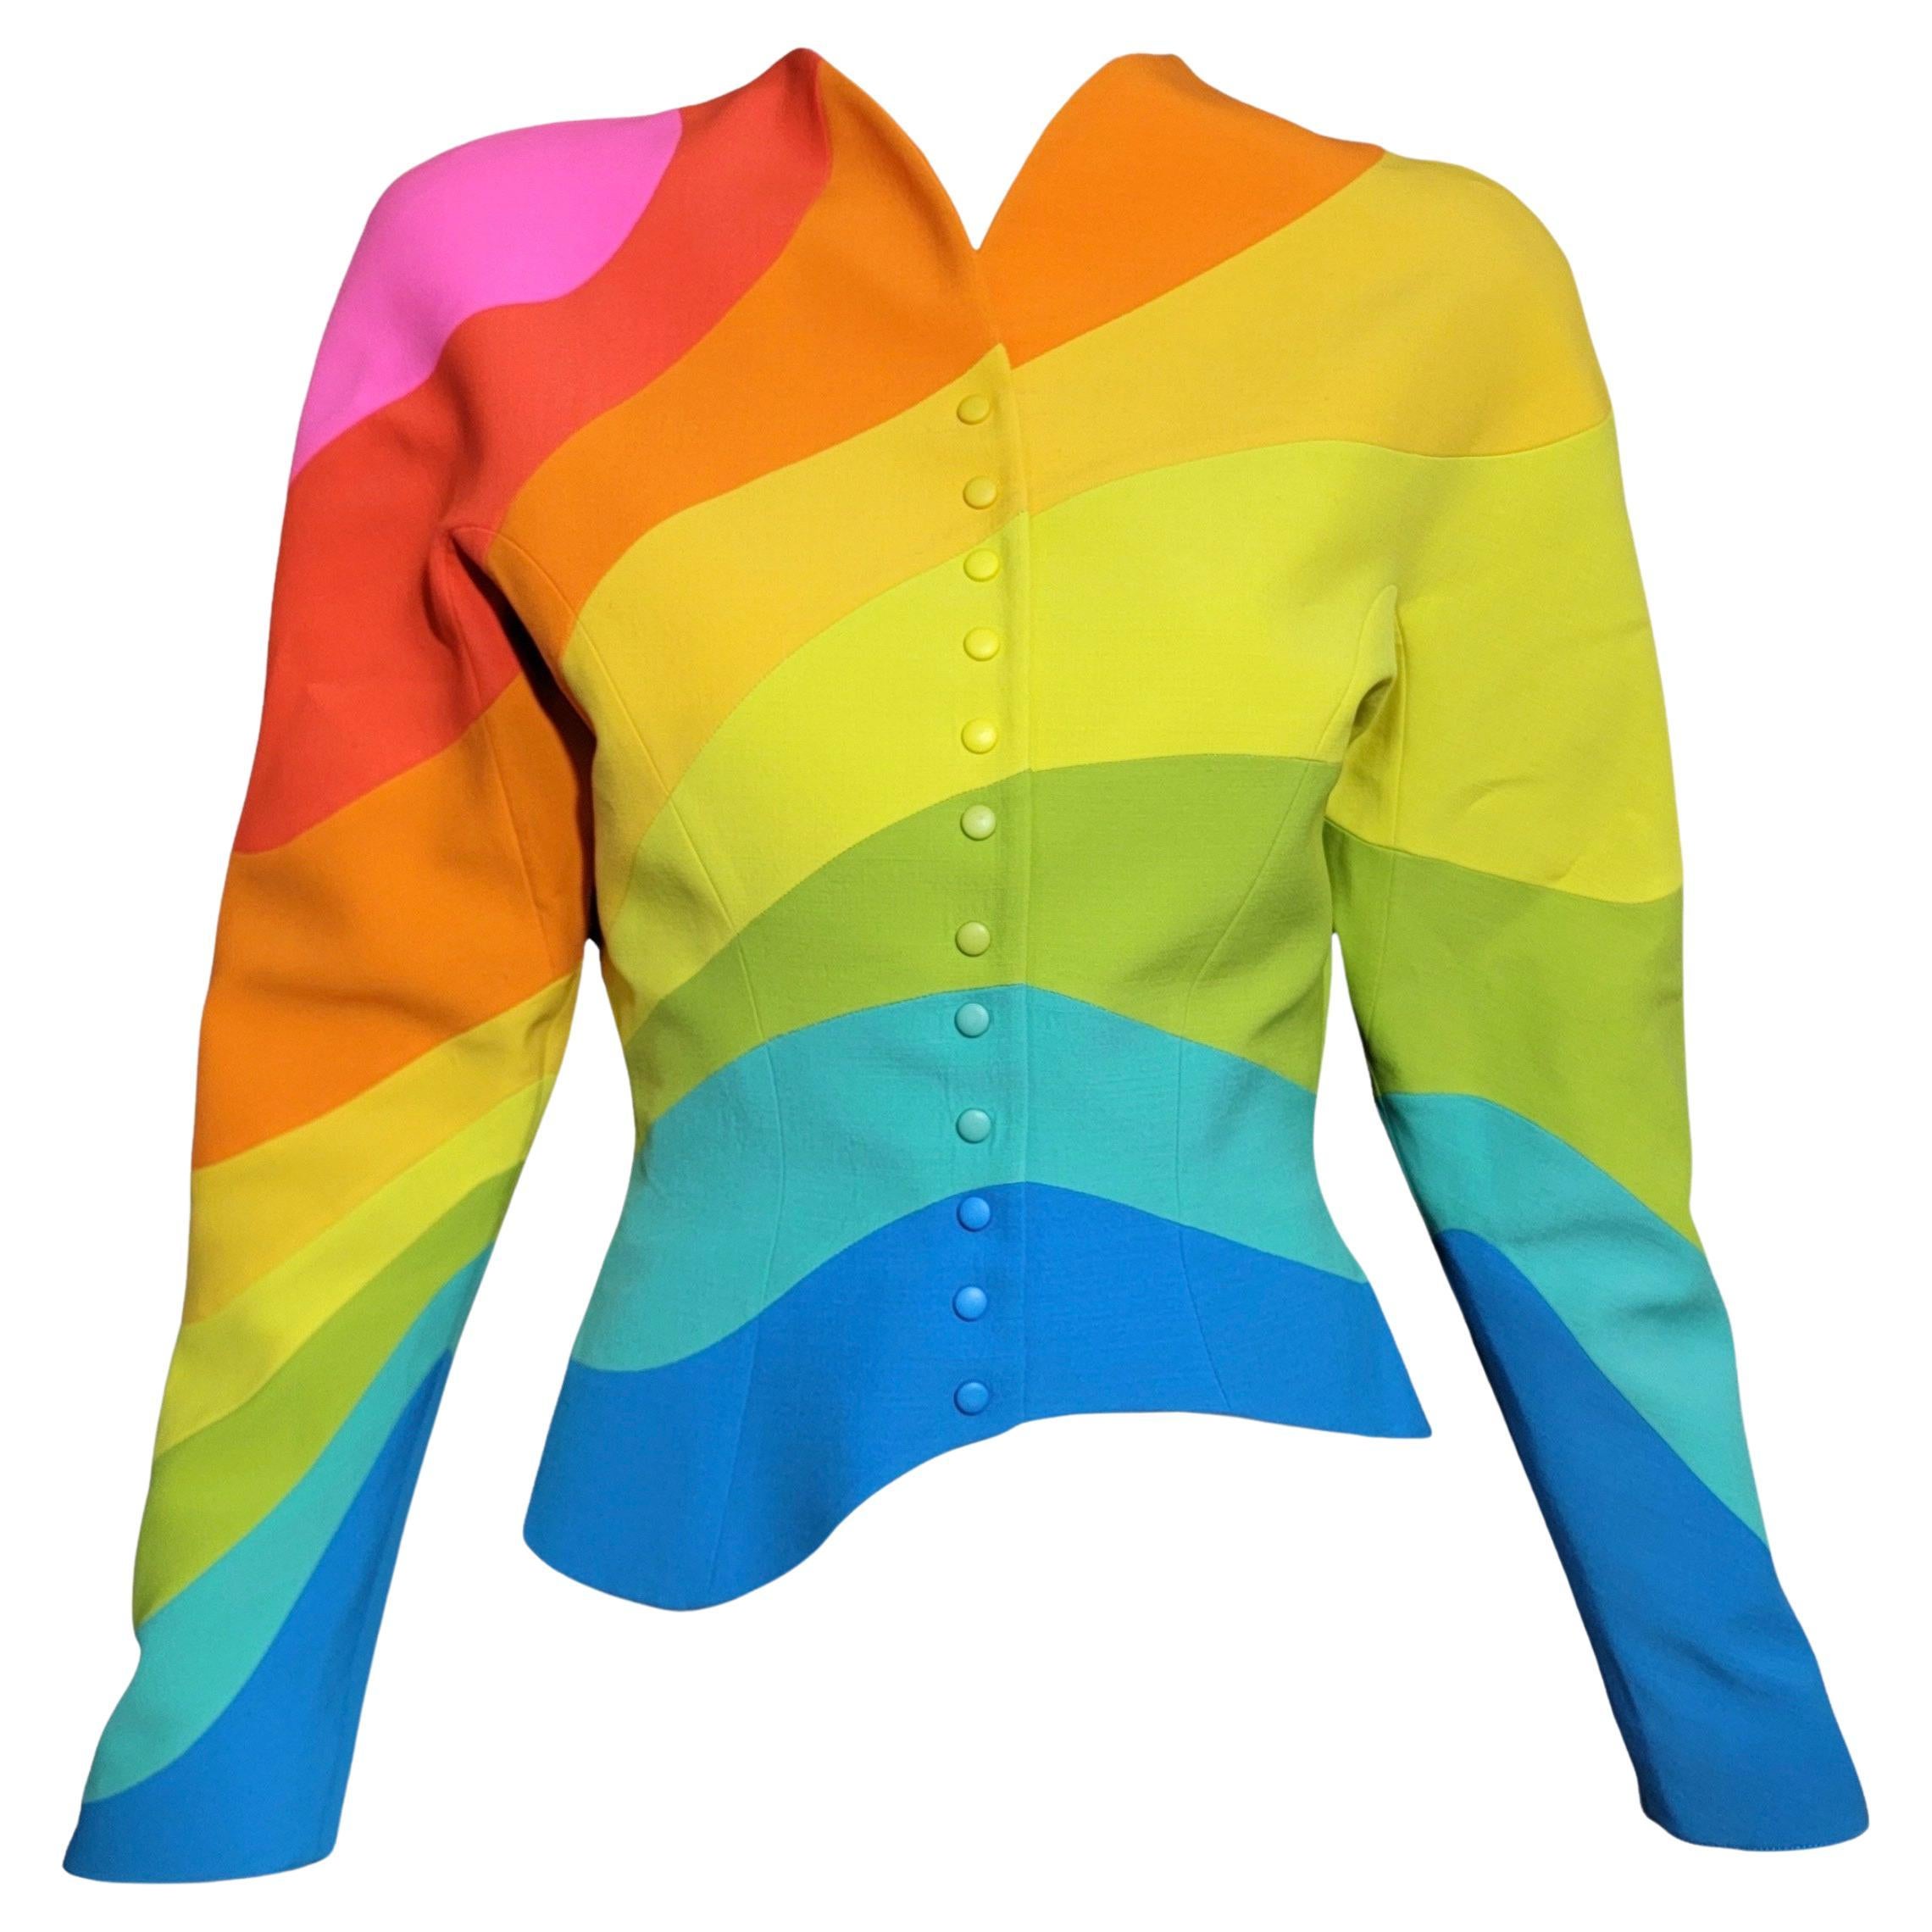 S/S 1990 Thierry Mugler Iconic Rainbow Structured Runway Jacket 